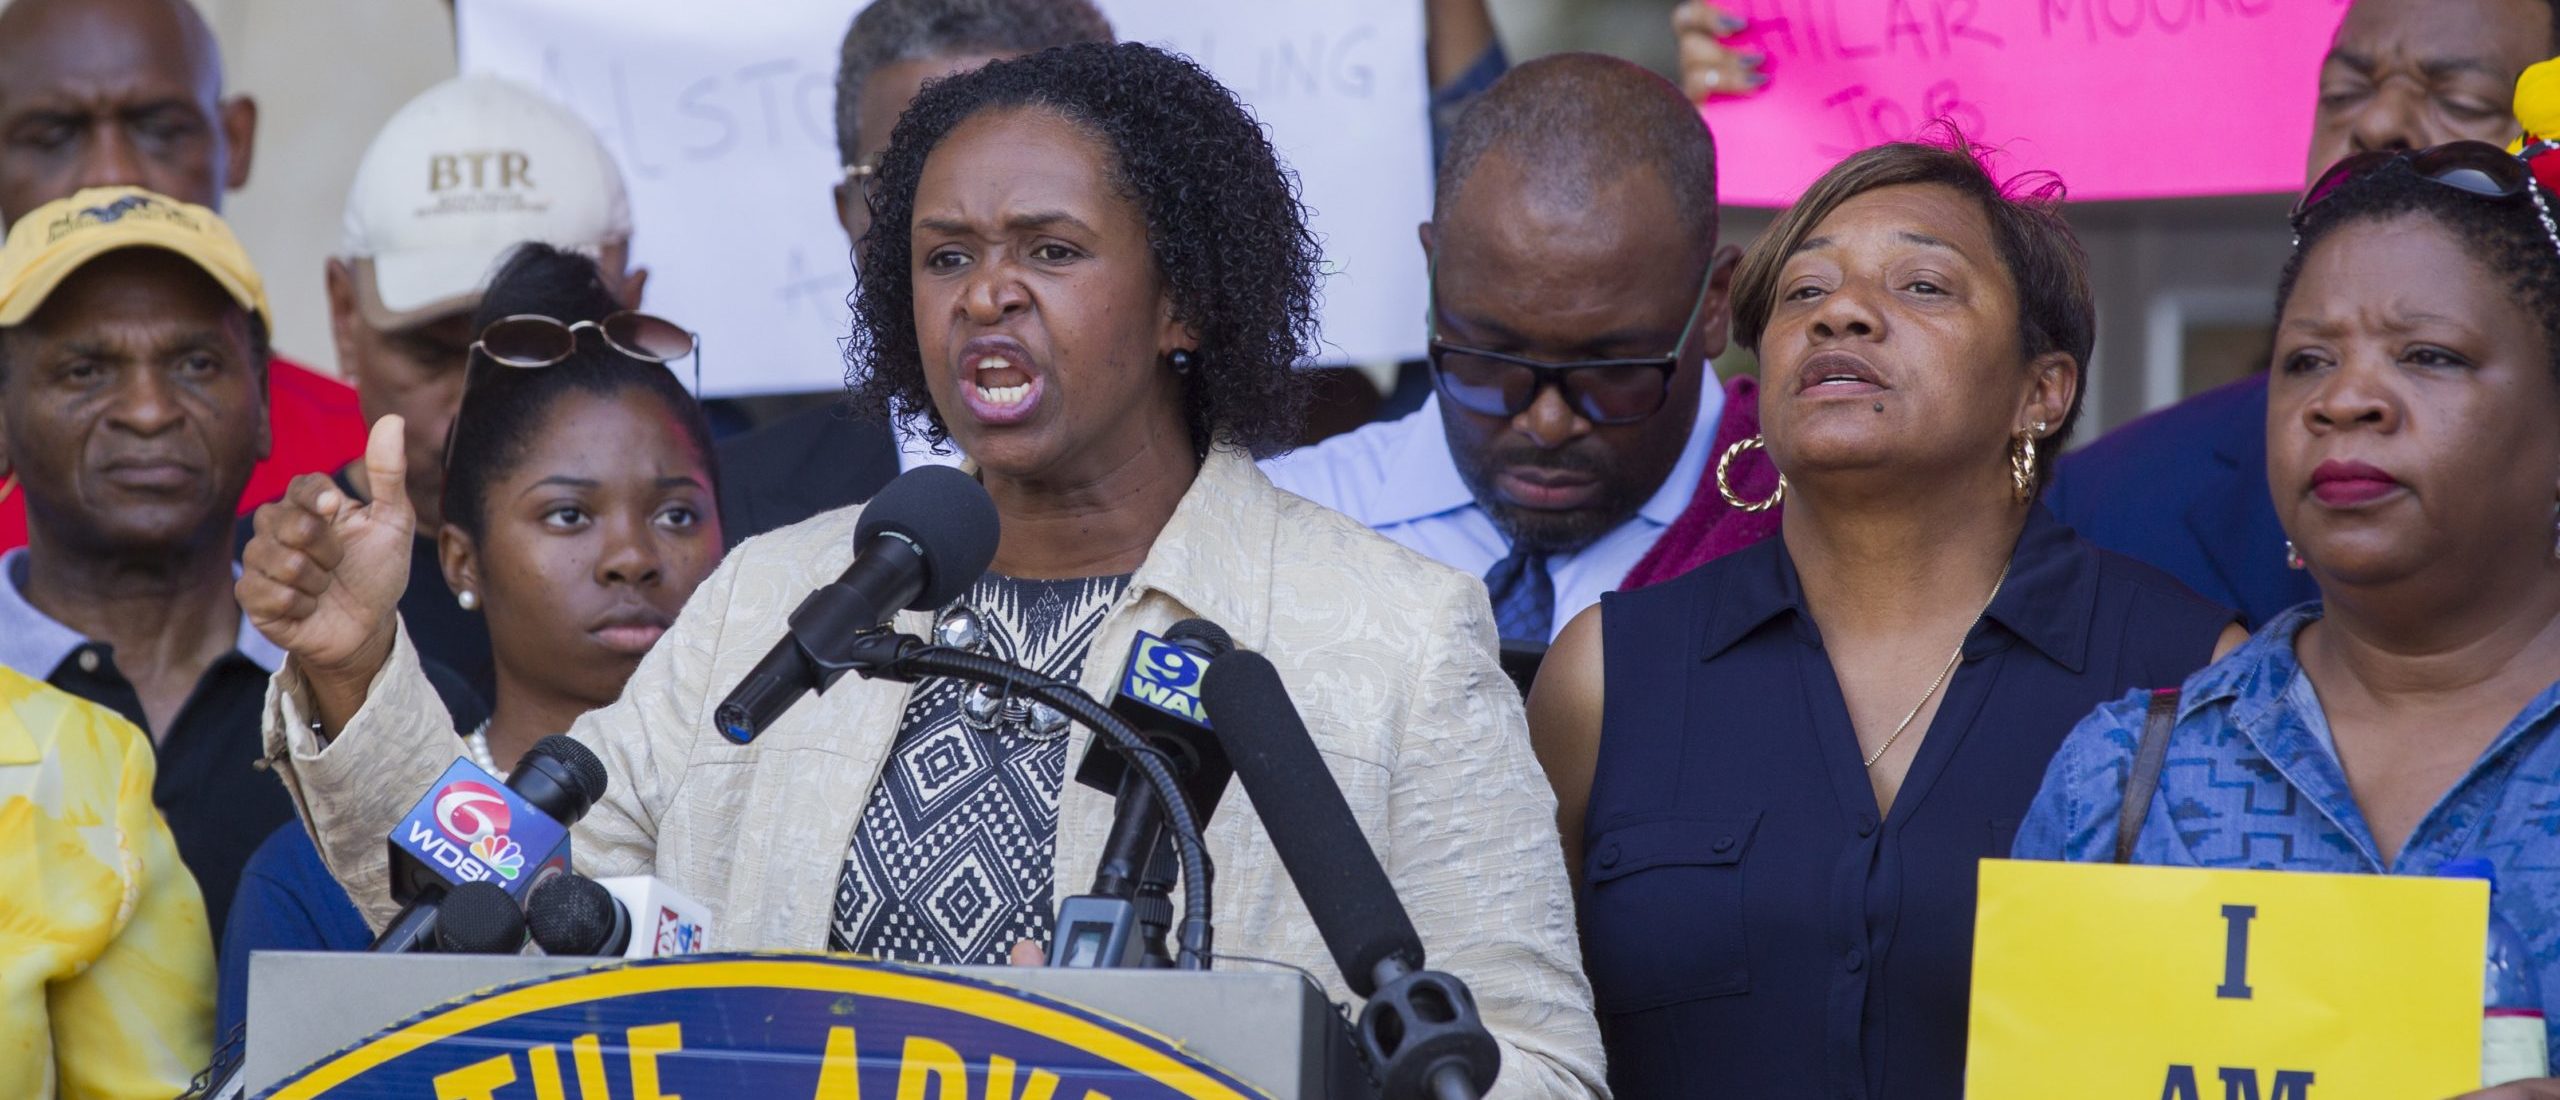 Louisiana NAACP Chapter Asks For ‘Travel Advisory’ Over GOP Bills | The ...